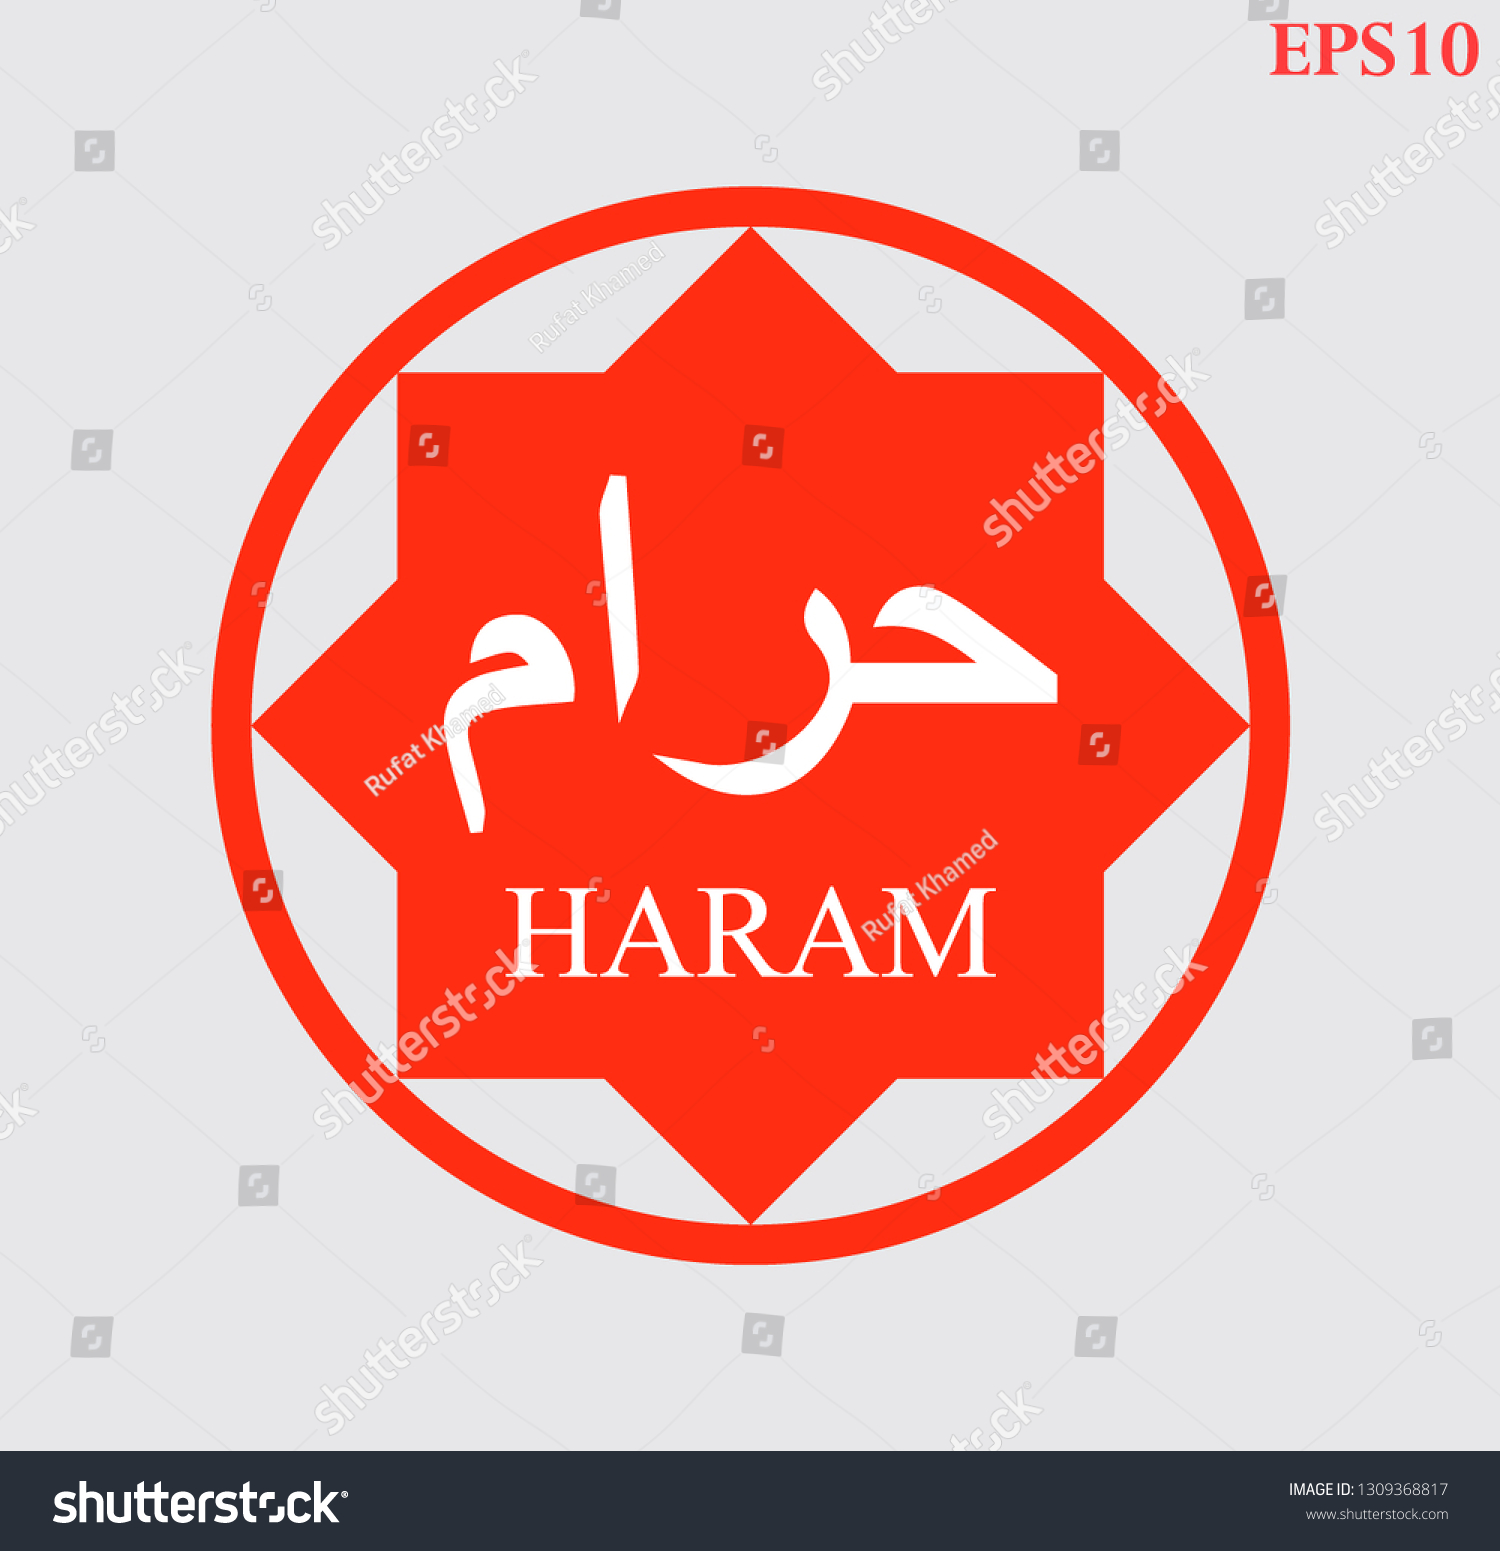 What is haram food